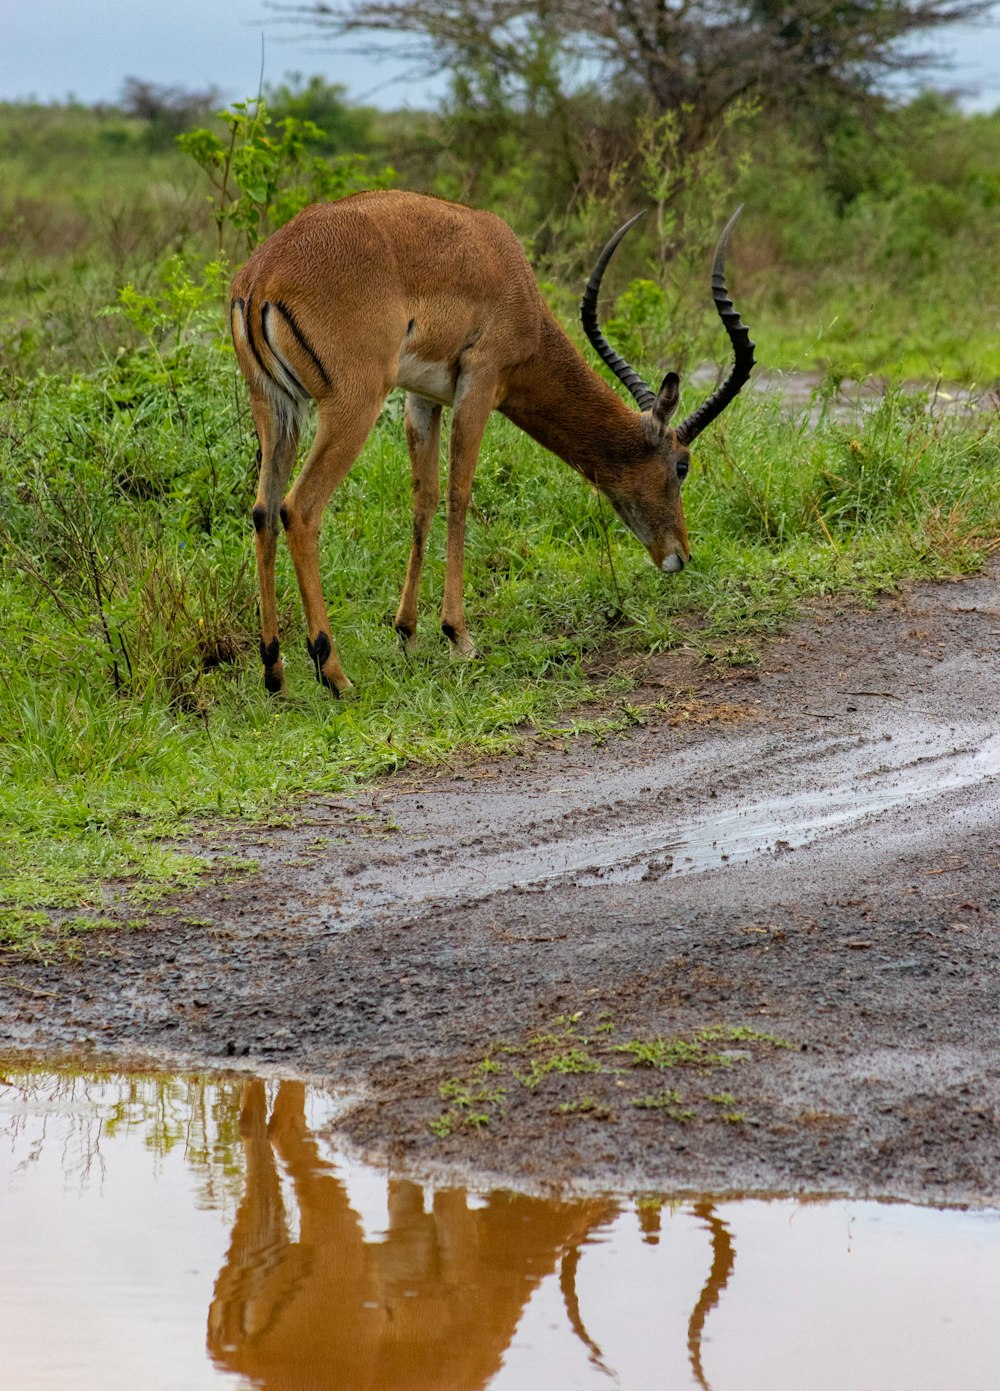 a gazelle drinking water from a puddle in the grass